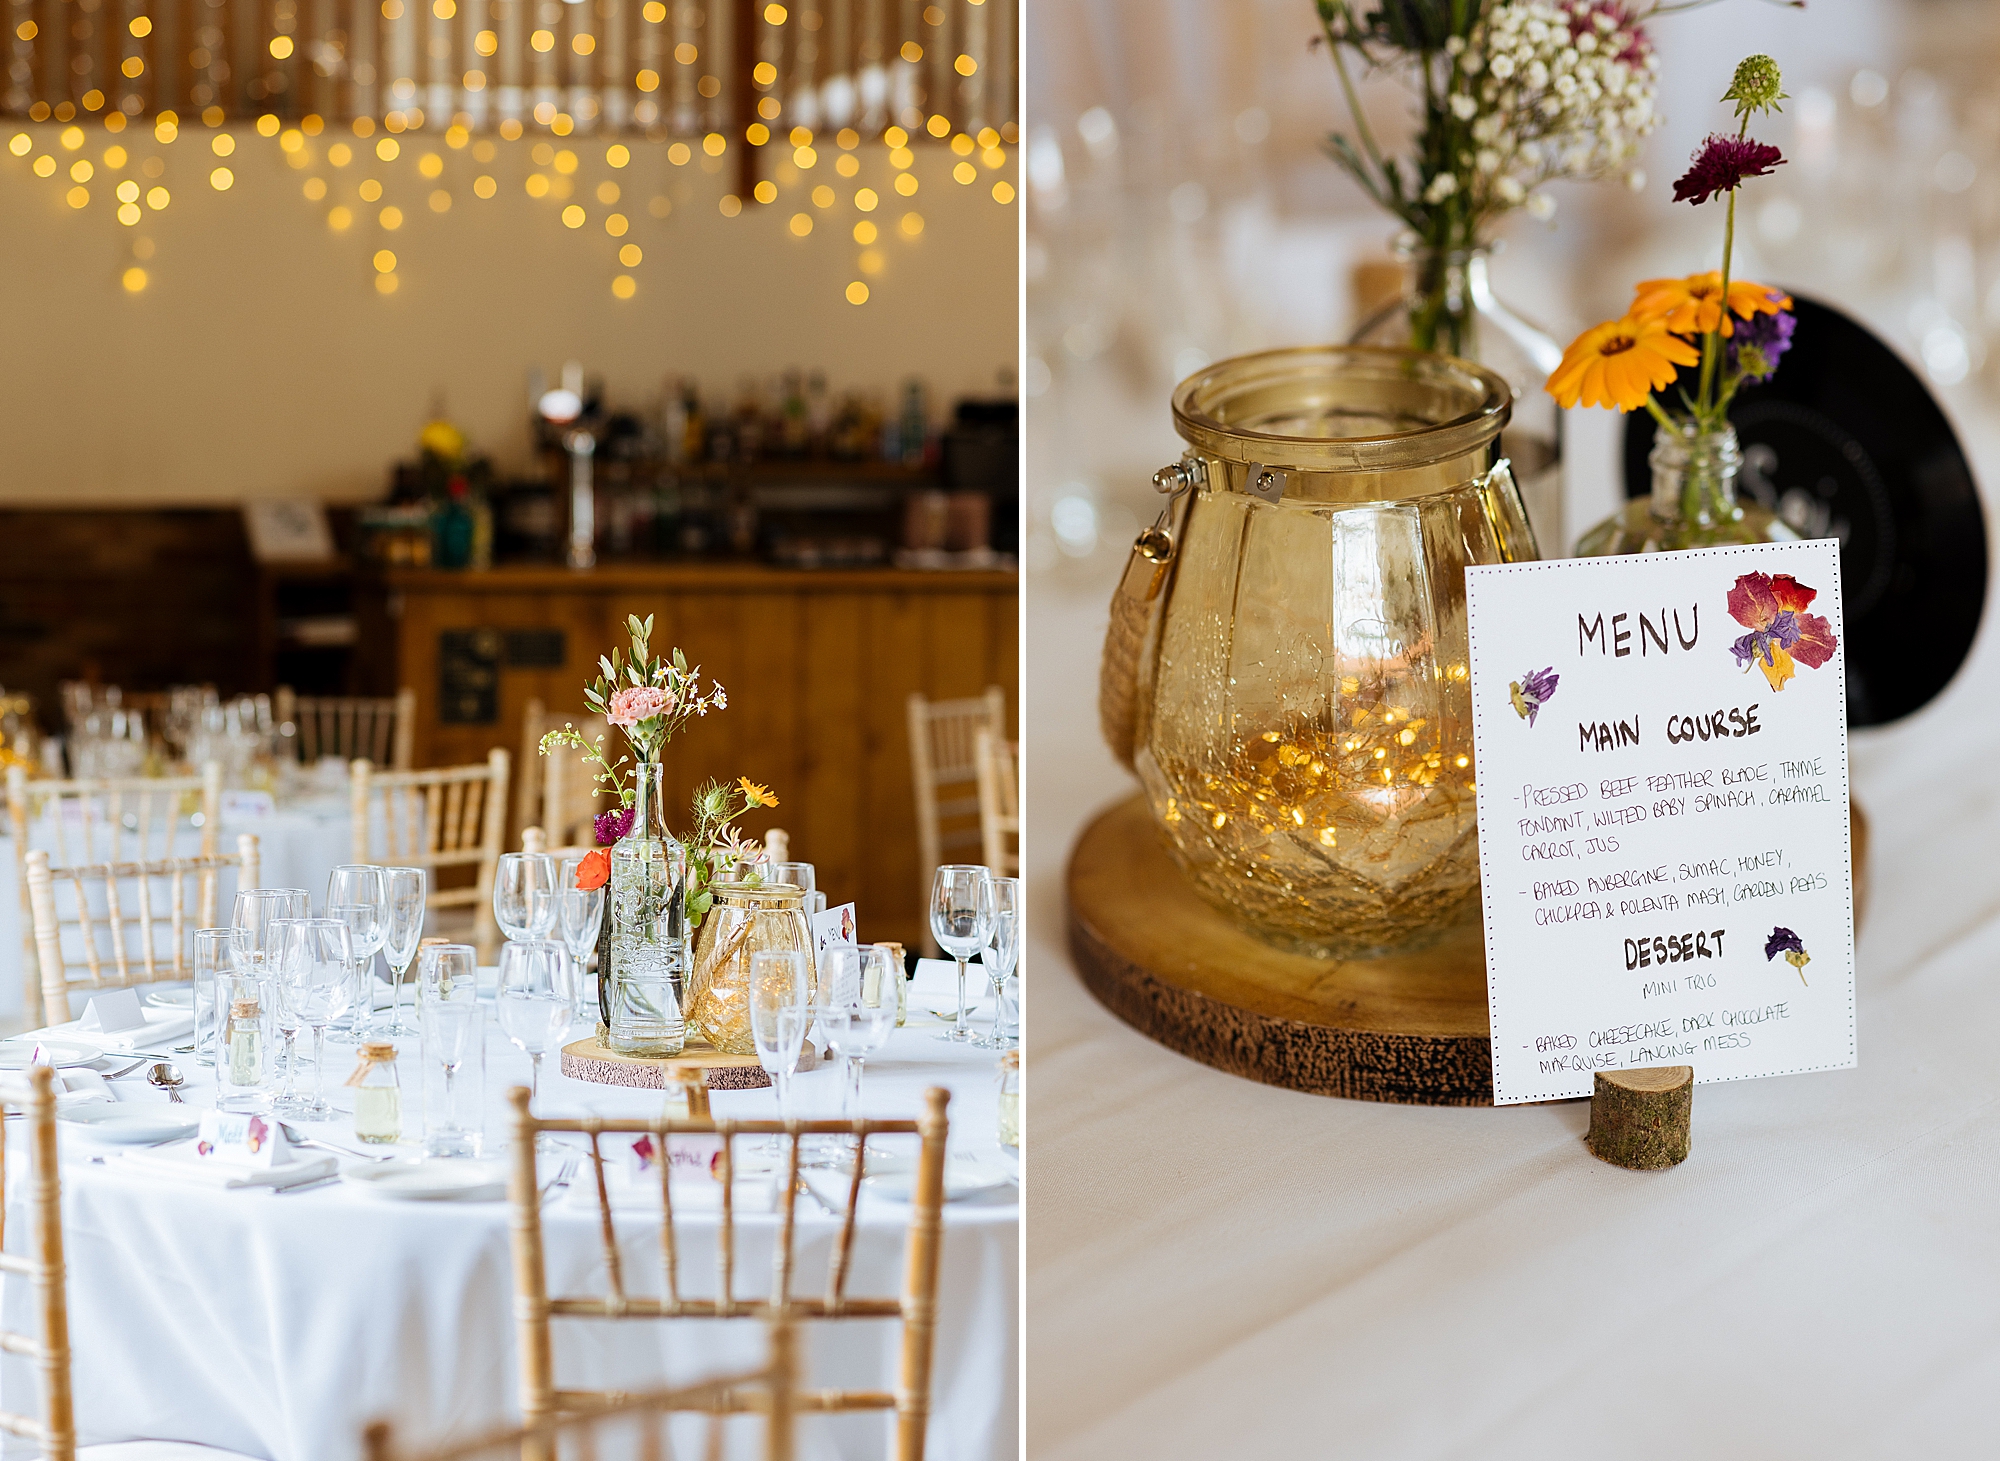 A contemporary wedding nestled in the countryside